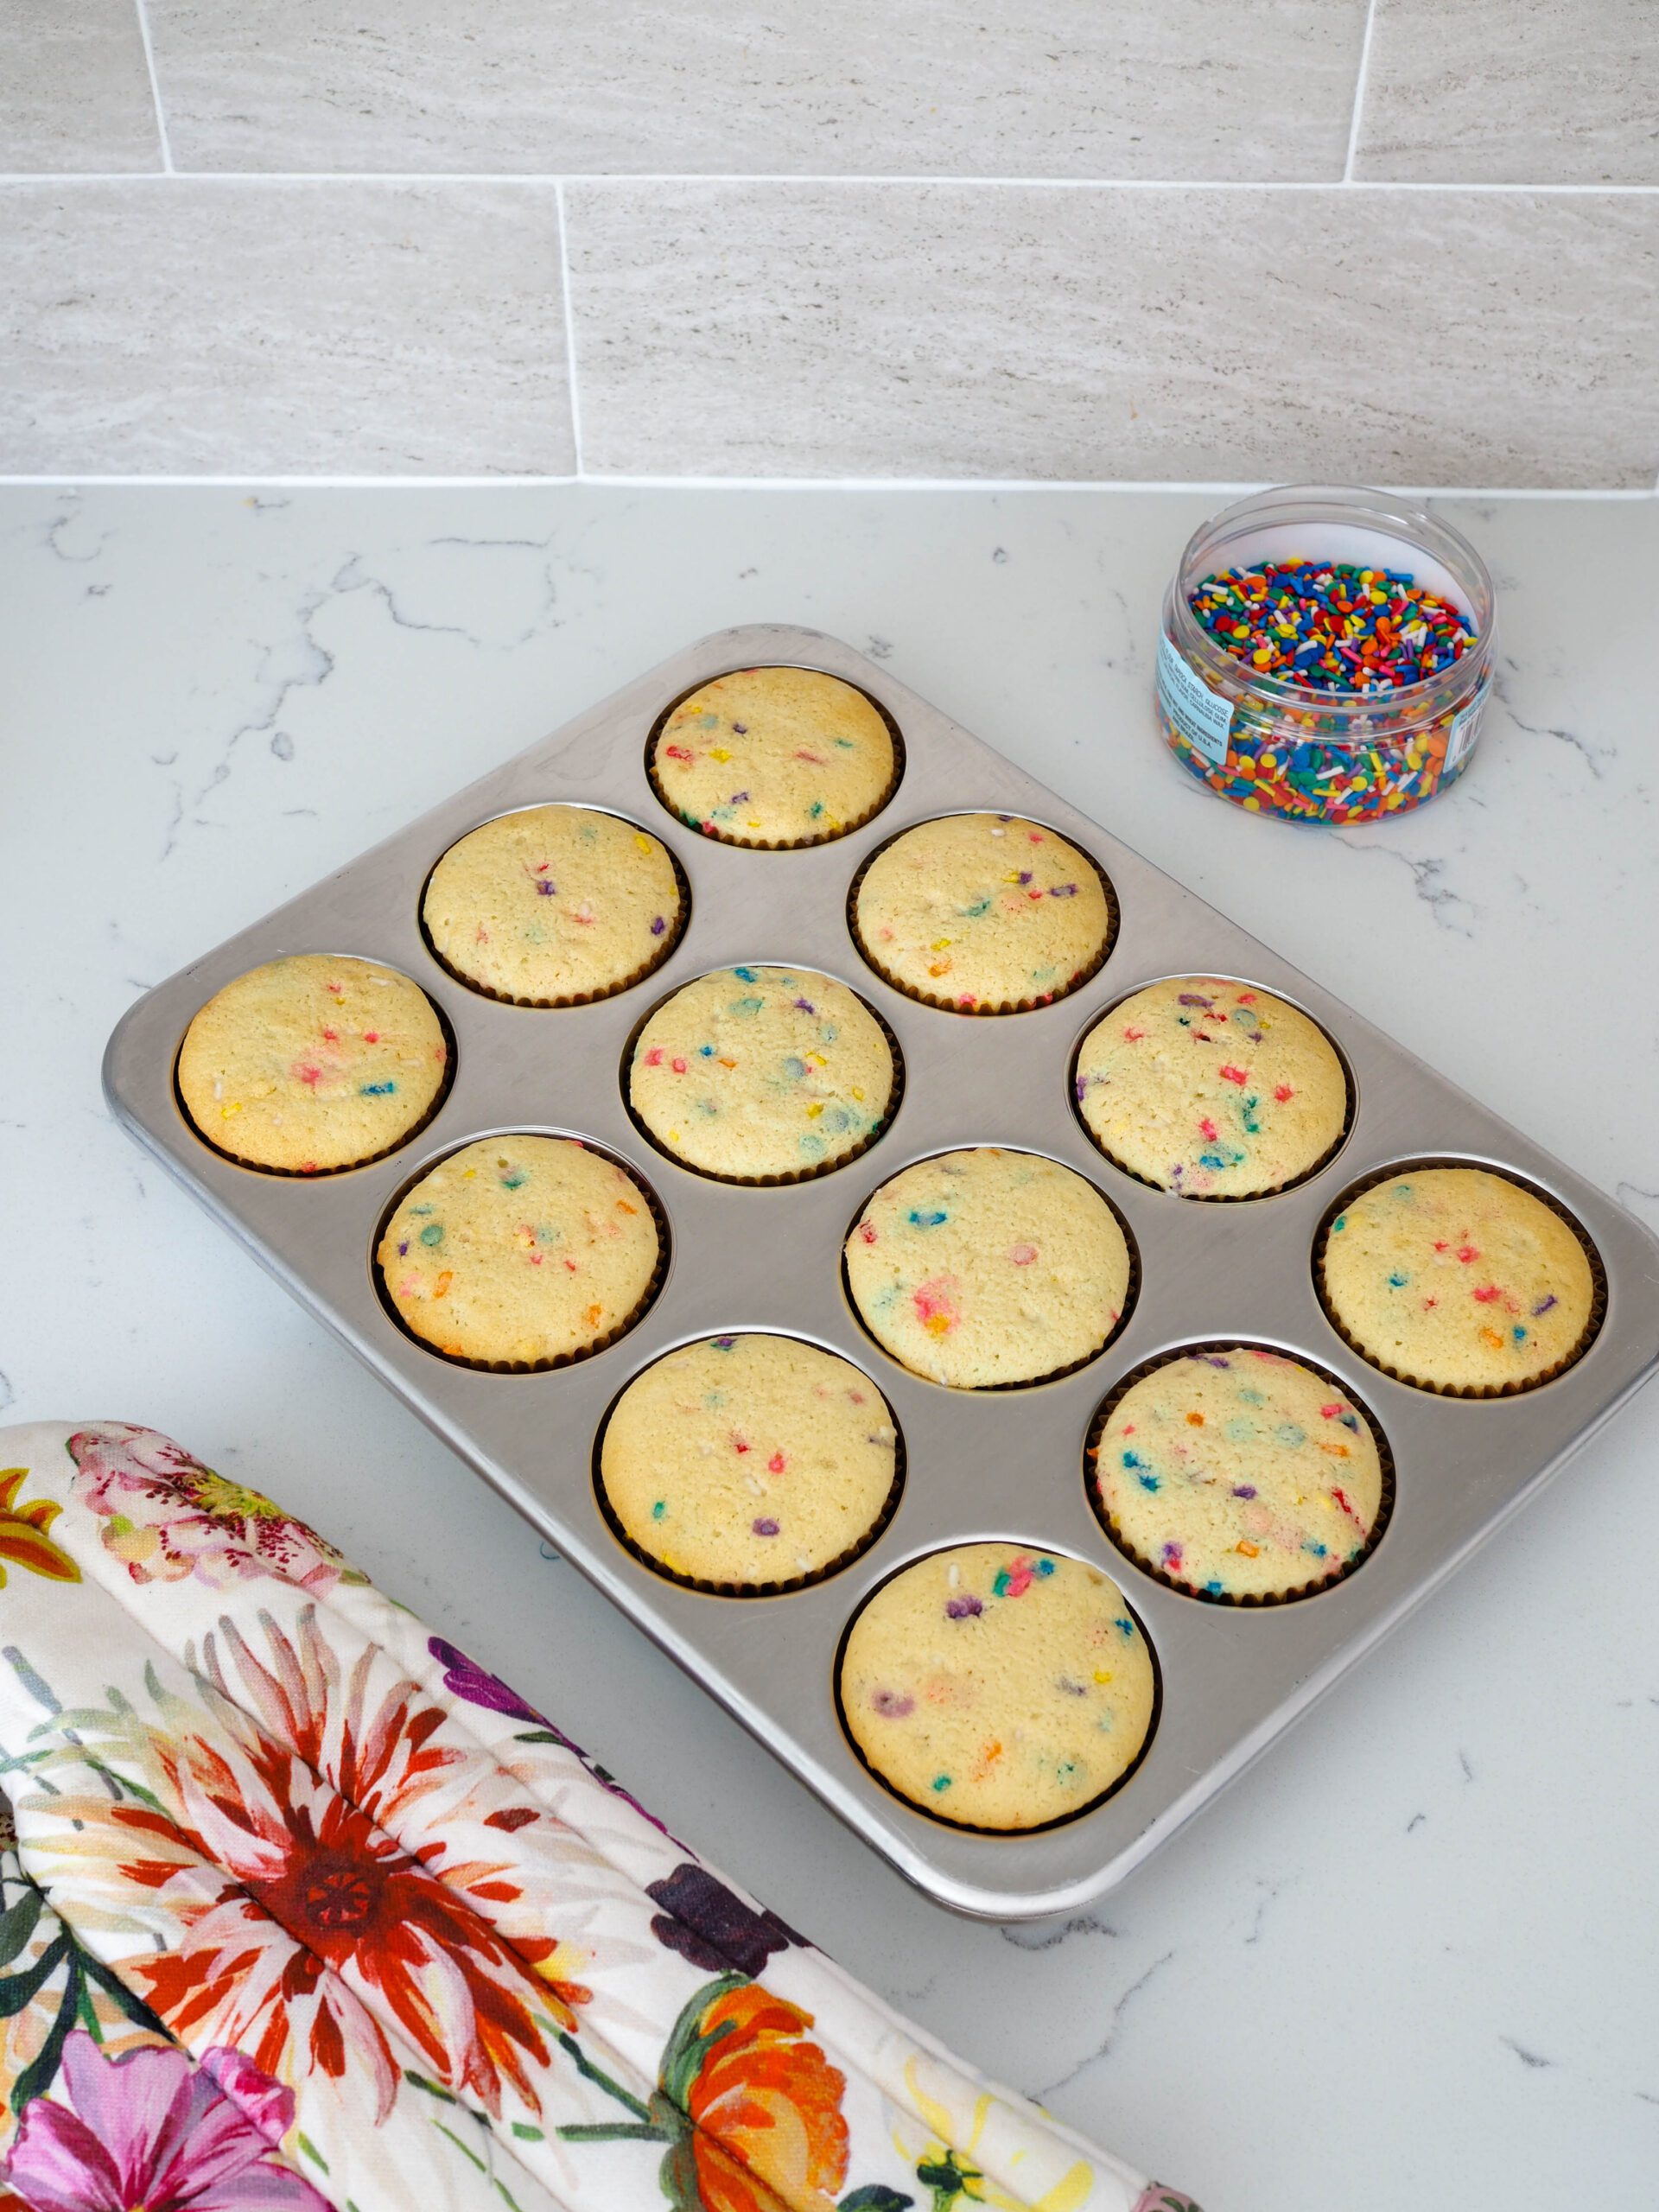 A batch of baked confetti cupcakes.